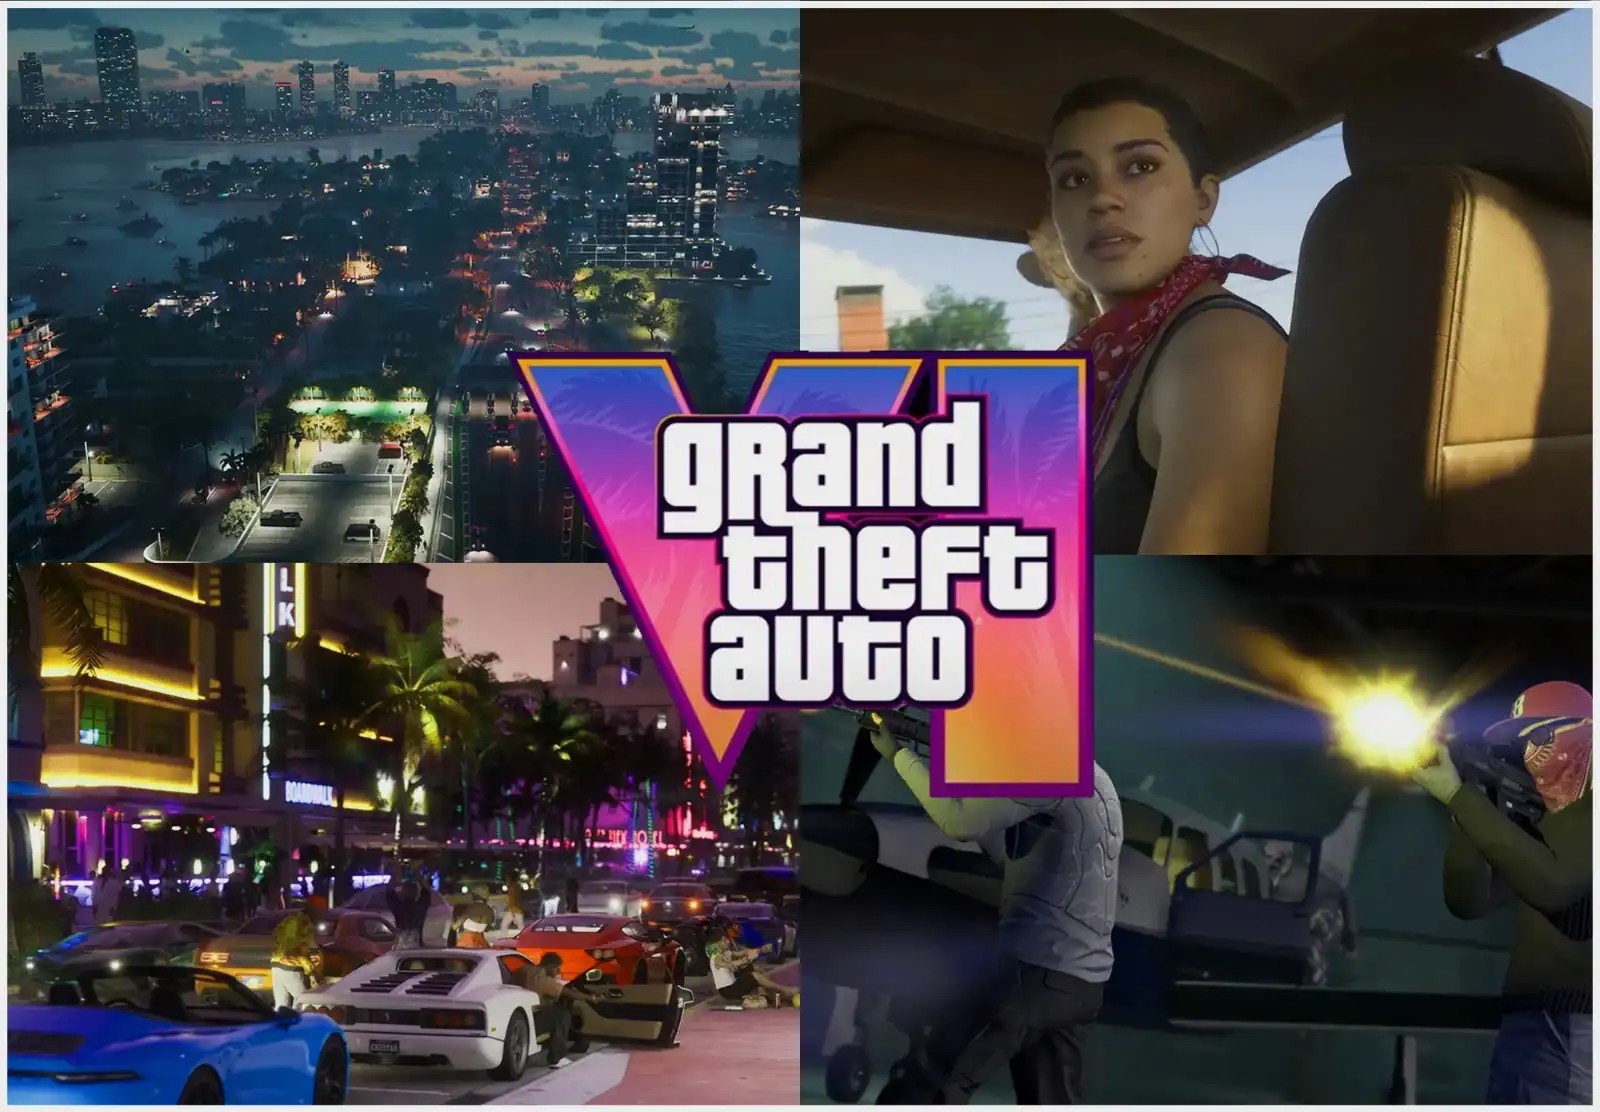 GTA 6 Gameplay Details Leaked - City, Lead Character, Release Window & More  (Grand Theft Auto 6) 